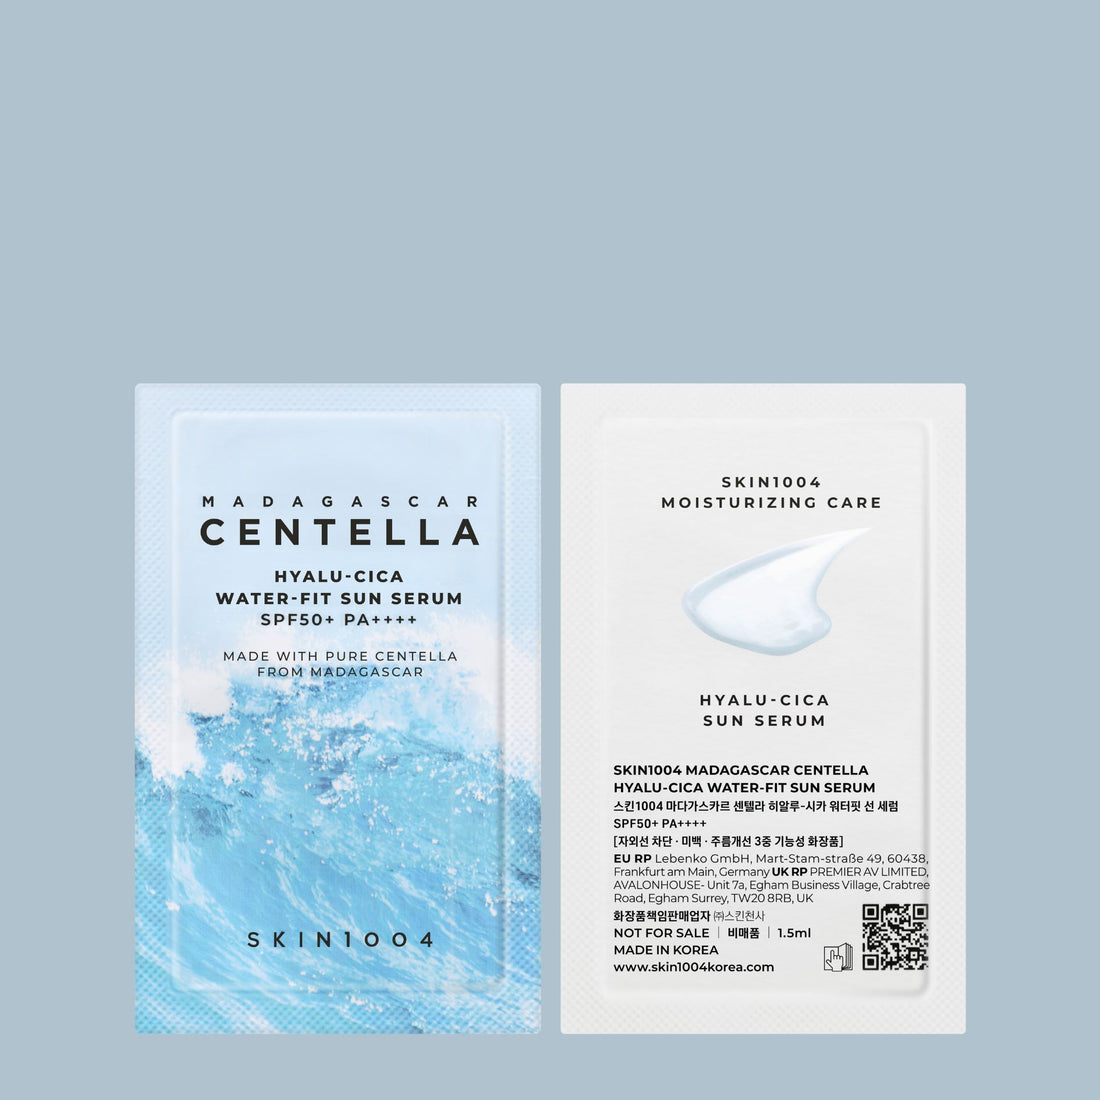 SKIN1004 Madagascar Centella Hyalu-Cica Water-fit Sun Serum SPF50+ PA++++ 1.5ml (Pouch Sample), at Orion Beauty. SKIN1004 Official Sole Authorized Retailer in Sri Lanka!